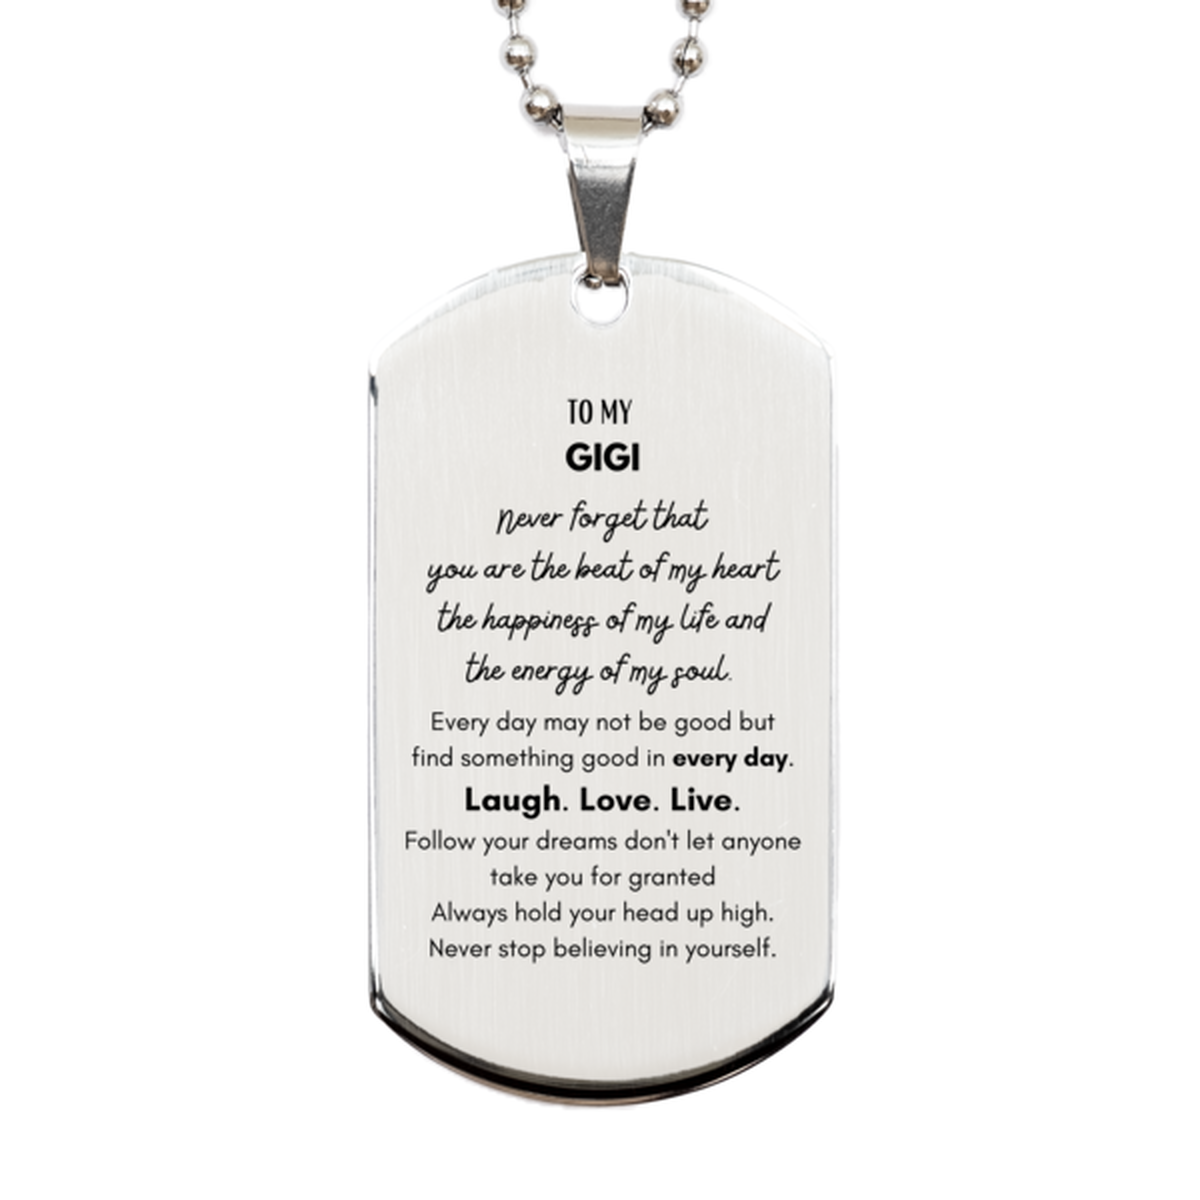 To My Gigi Dogtag Gifts, Christmas Gigi Silver Dog Tag Present, Birthday Unique Motivational For Gigi, To My Gigi Never forget that you are the beat of my heart the happiness of my life and the energy of my soul